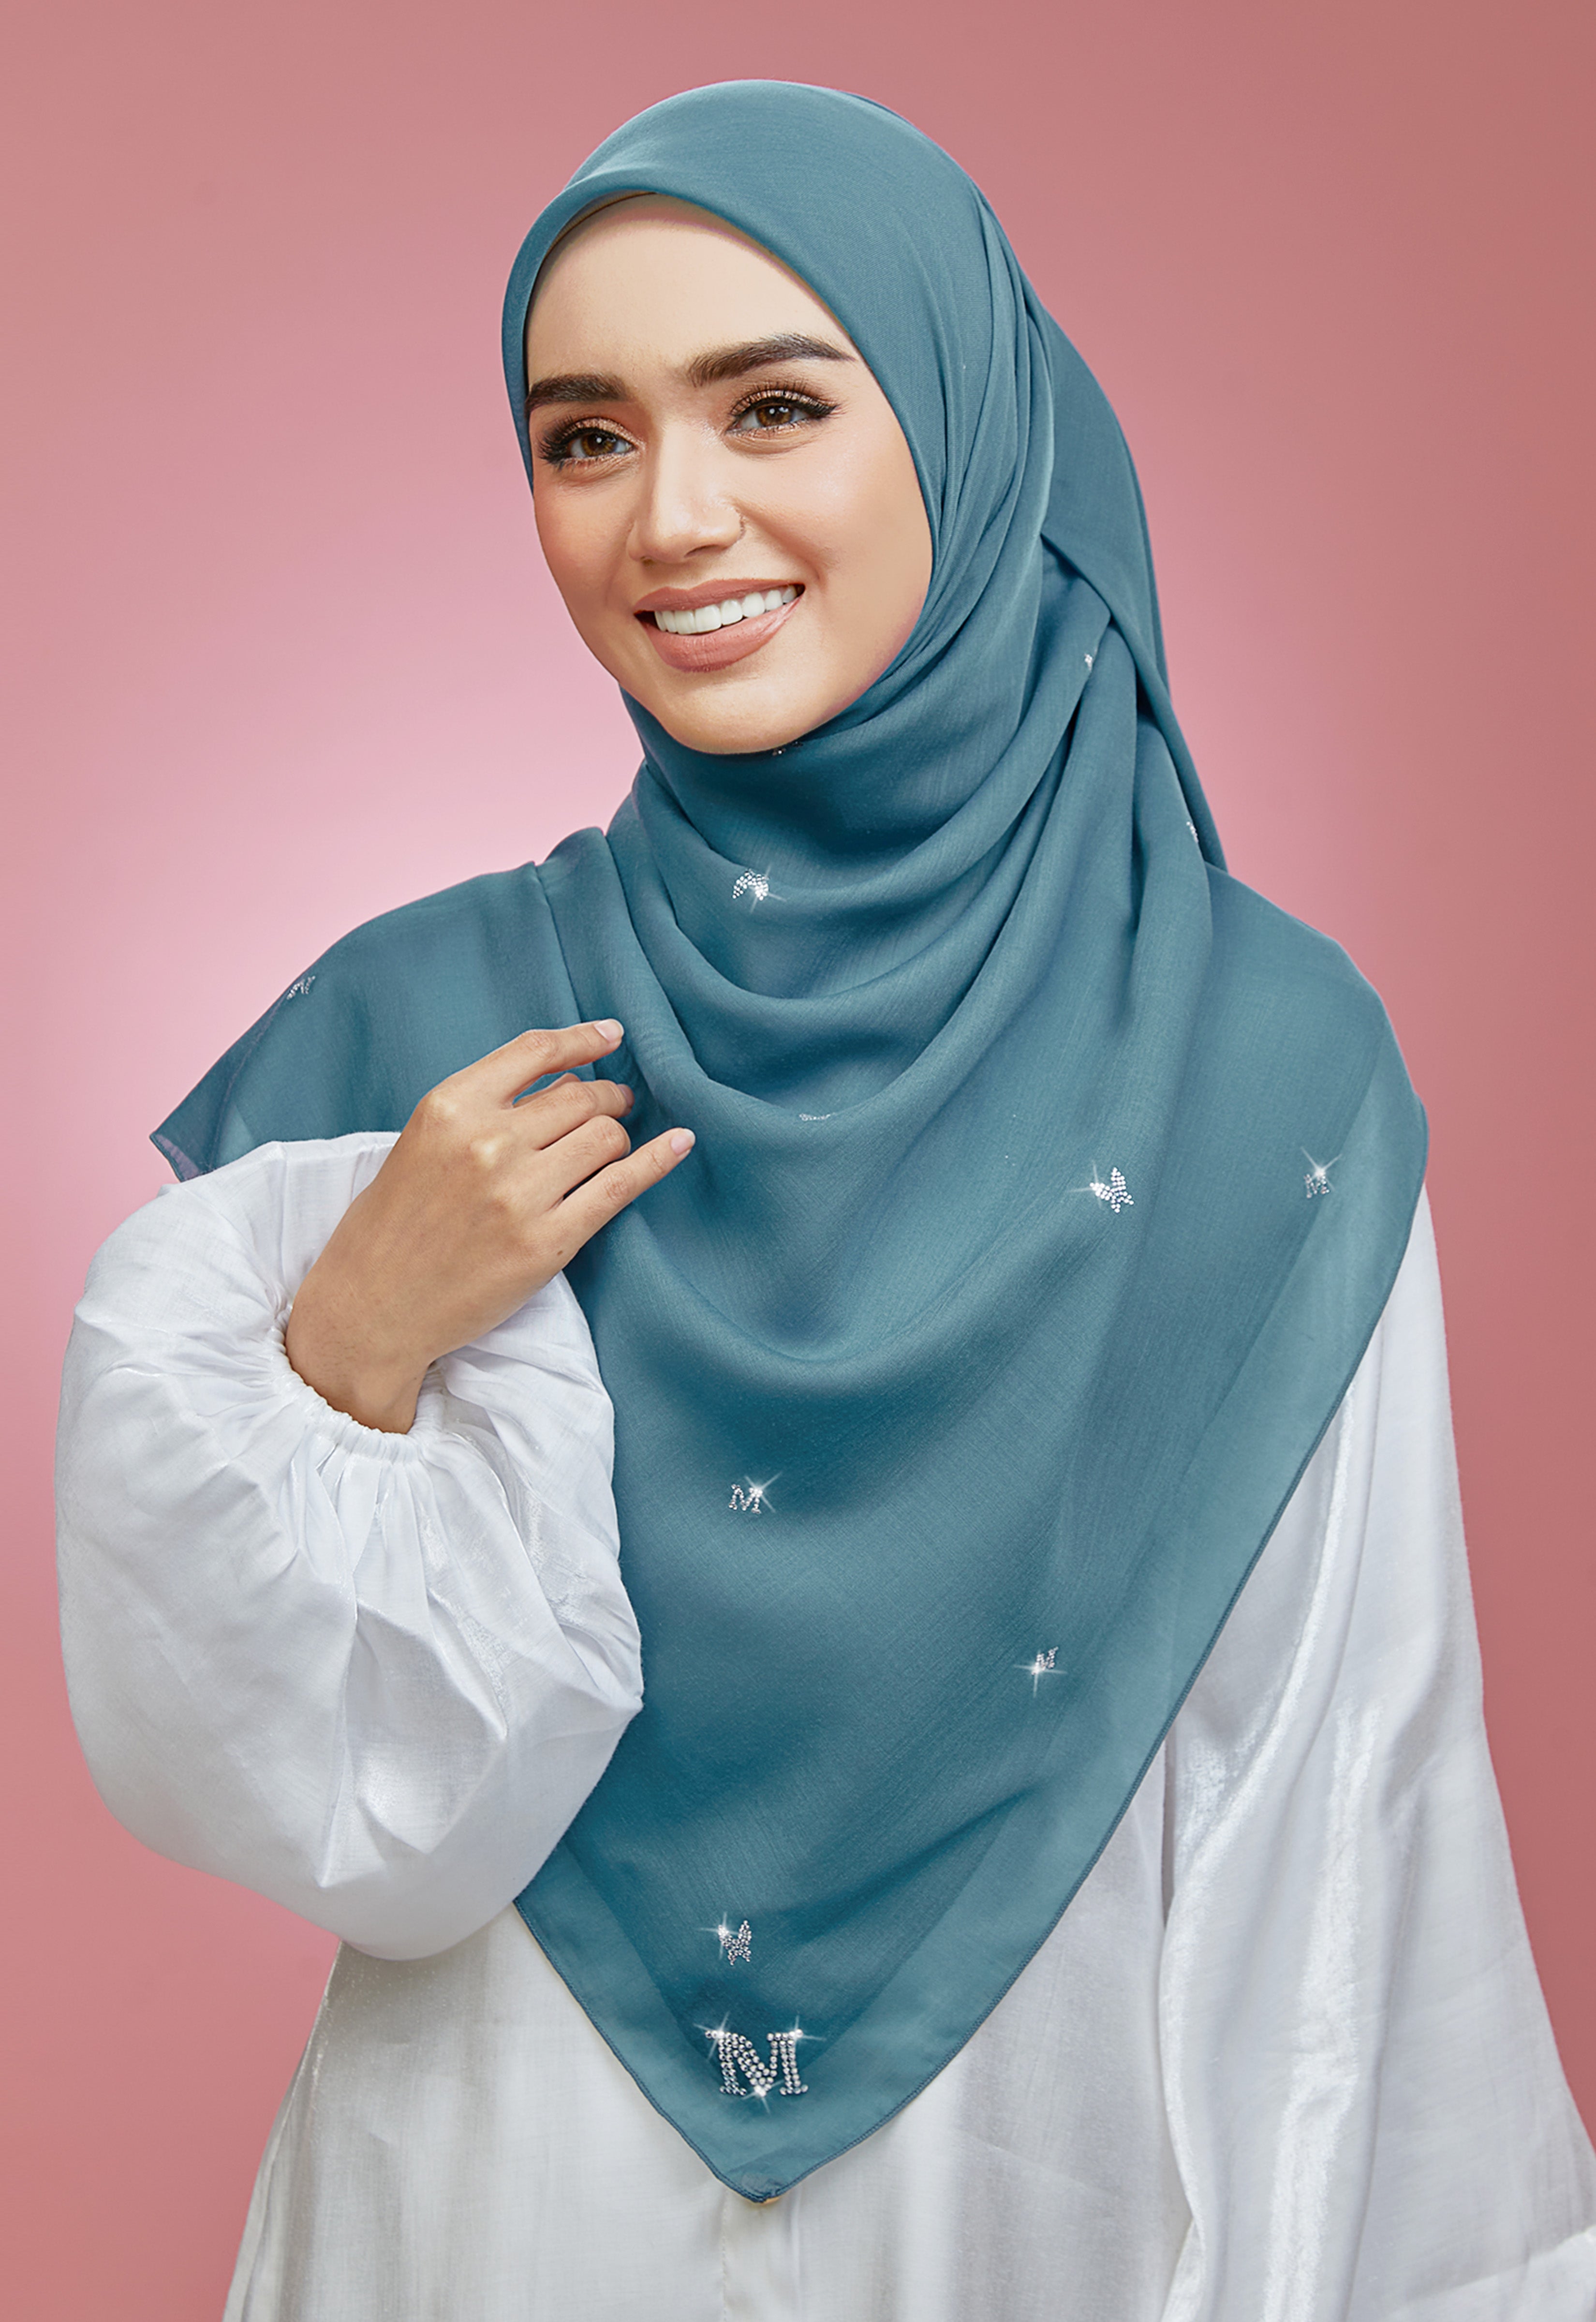 PLAIN BUTTERFLY STONE BAWAL - TURQUOISE BLUE